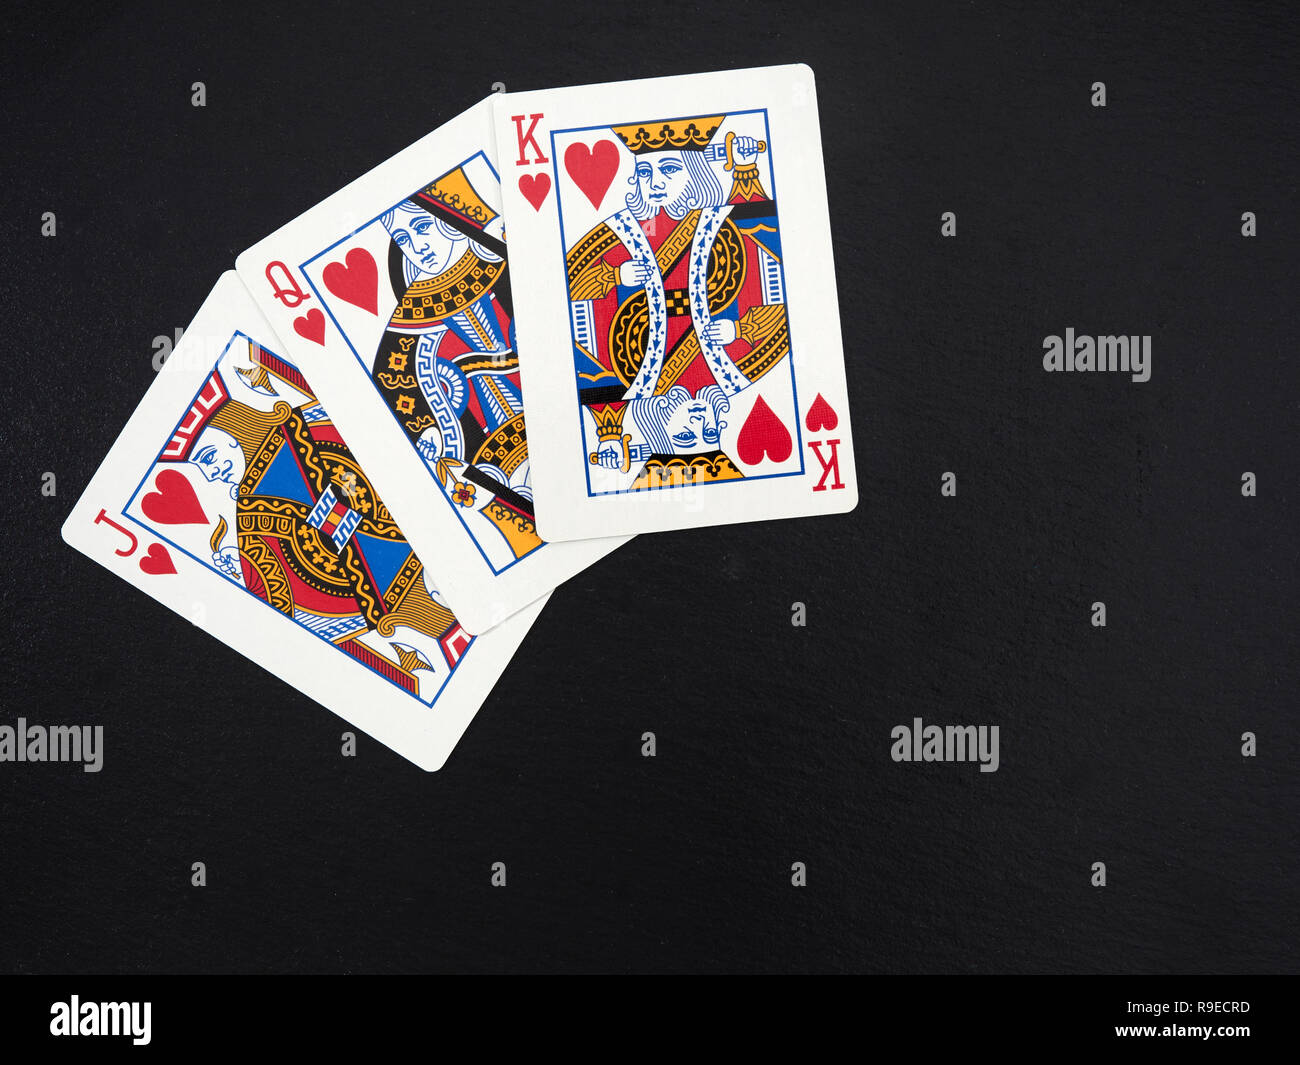 Poker, french playing cards, figures: jack, queen, king of hearts, on  a black slate surface Stock Photo